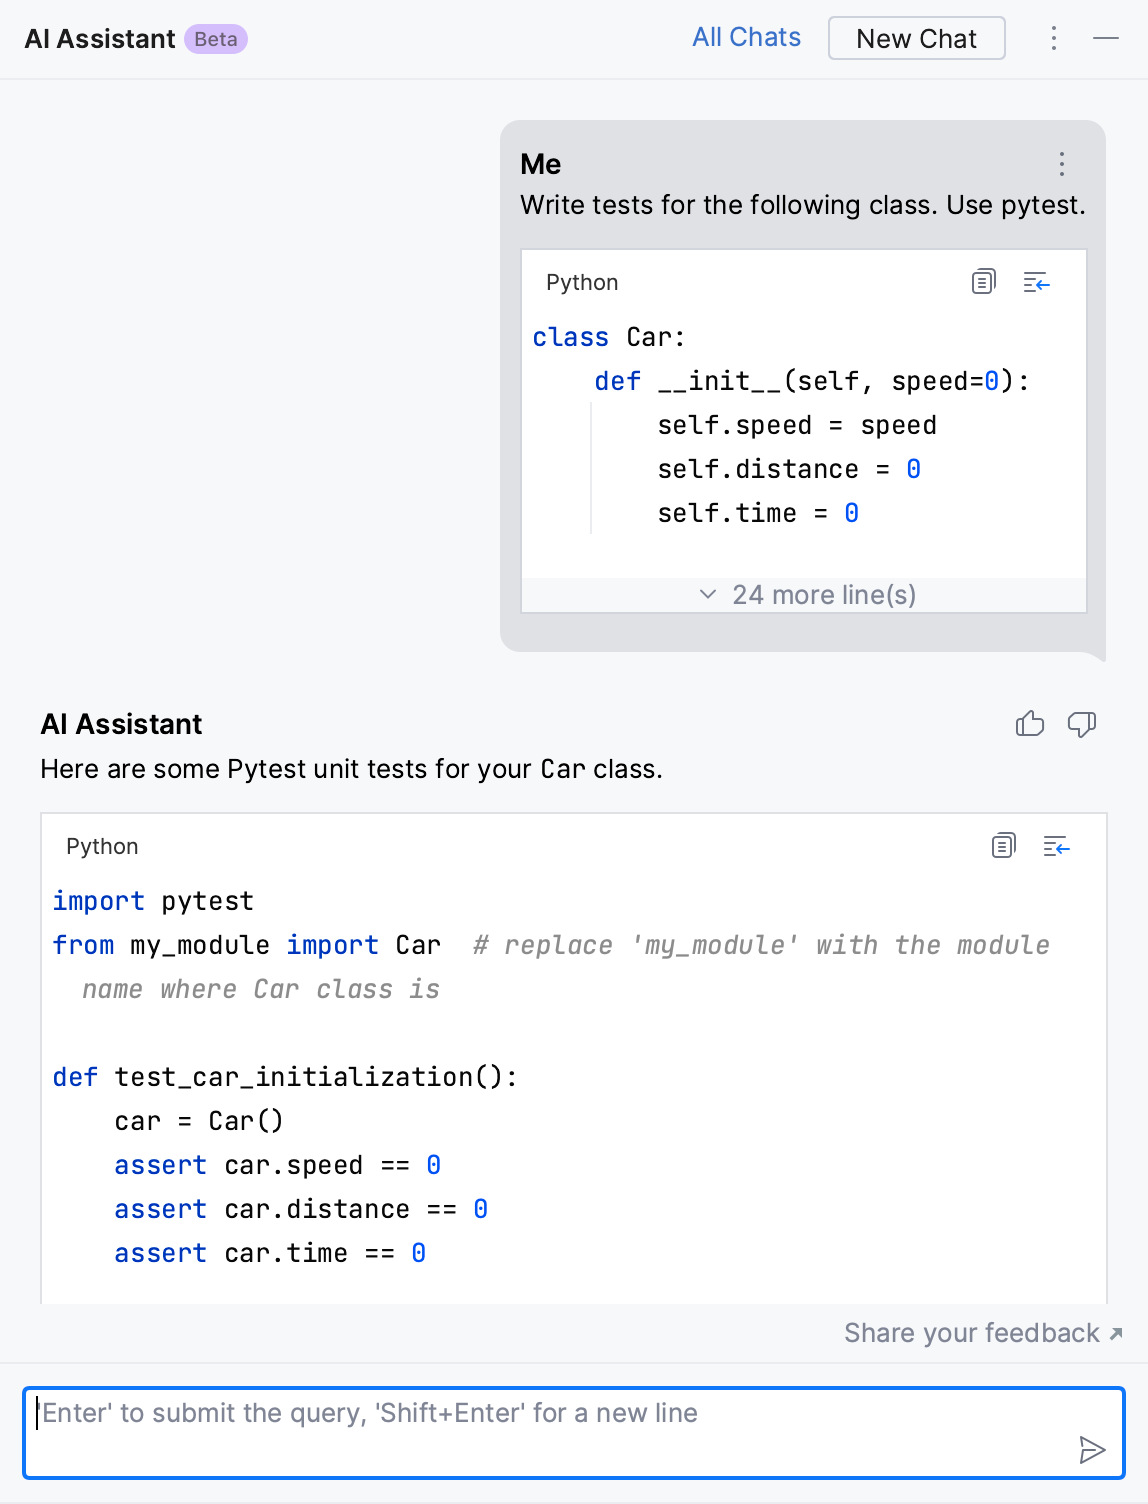 PyCharm: Asking AI Assistant programming-related questions